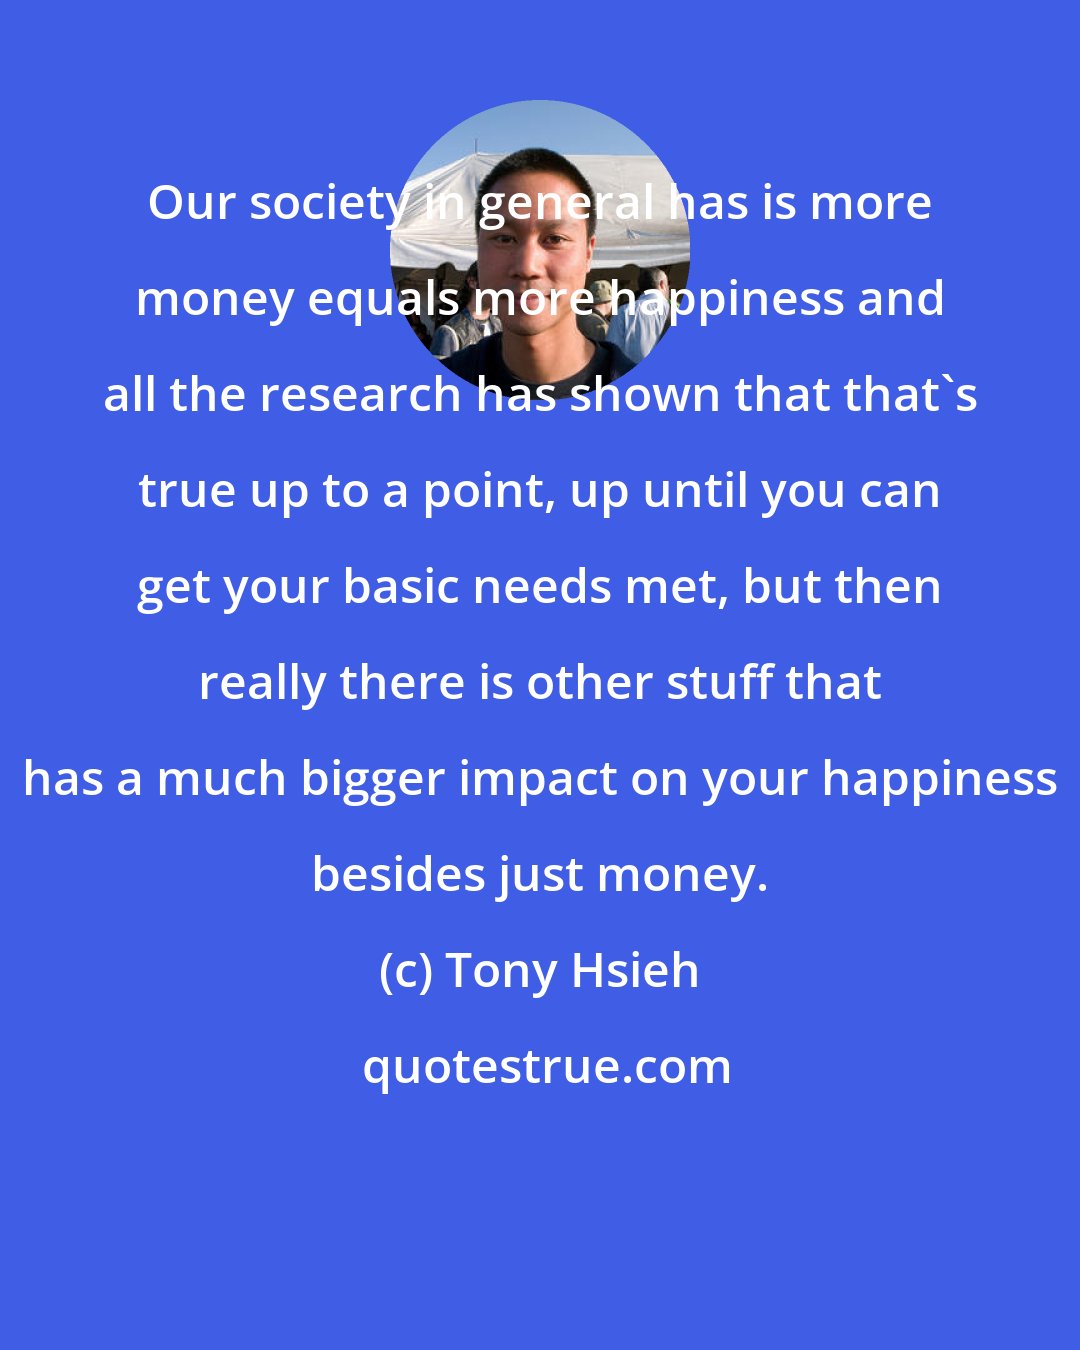 Tony Hsieh: Our society in general has is more money equals more happiness and all the research has shown that that's true up to a point, up until you can get your basic needs met, but then really there is other stuff that has a much bigger impact on your happiness besides just money.